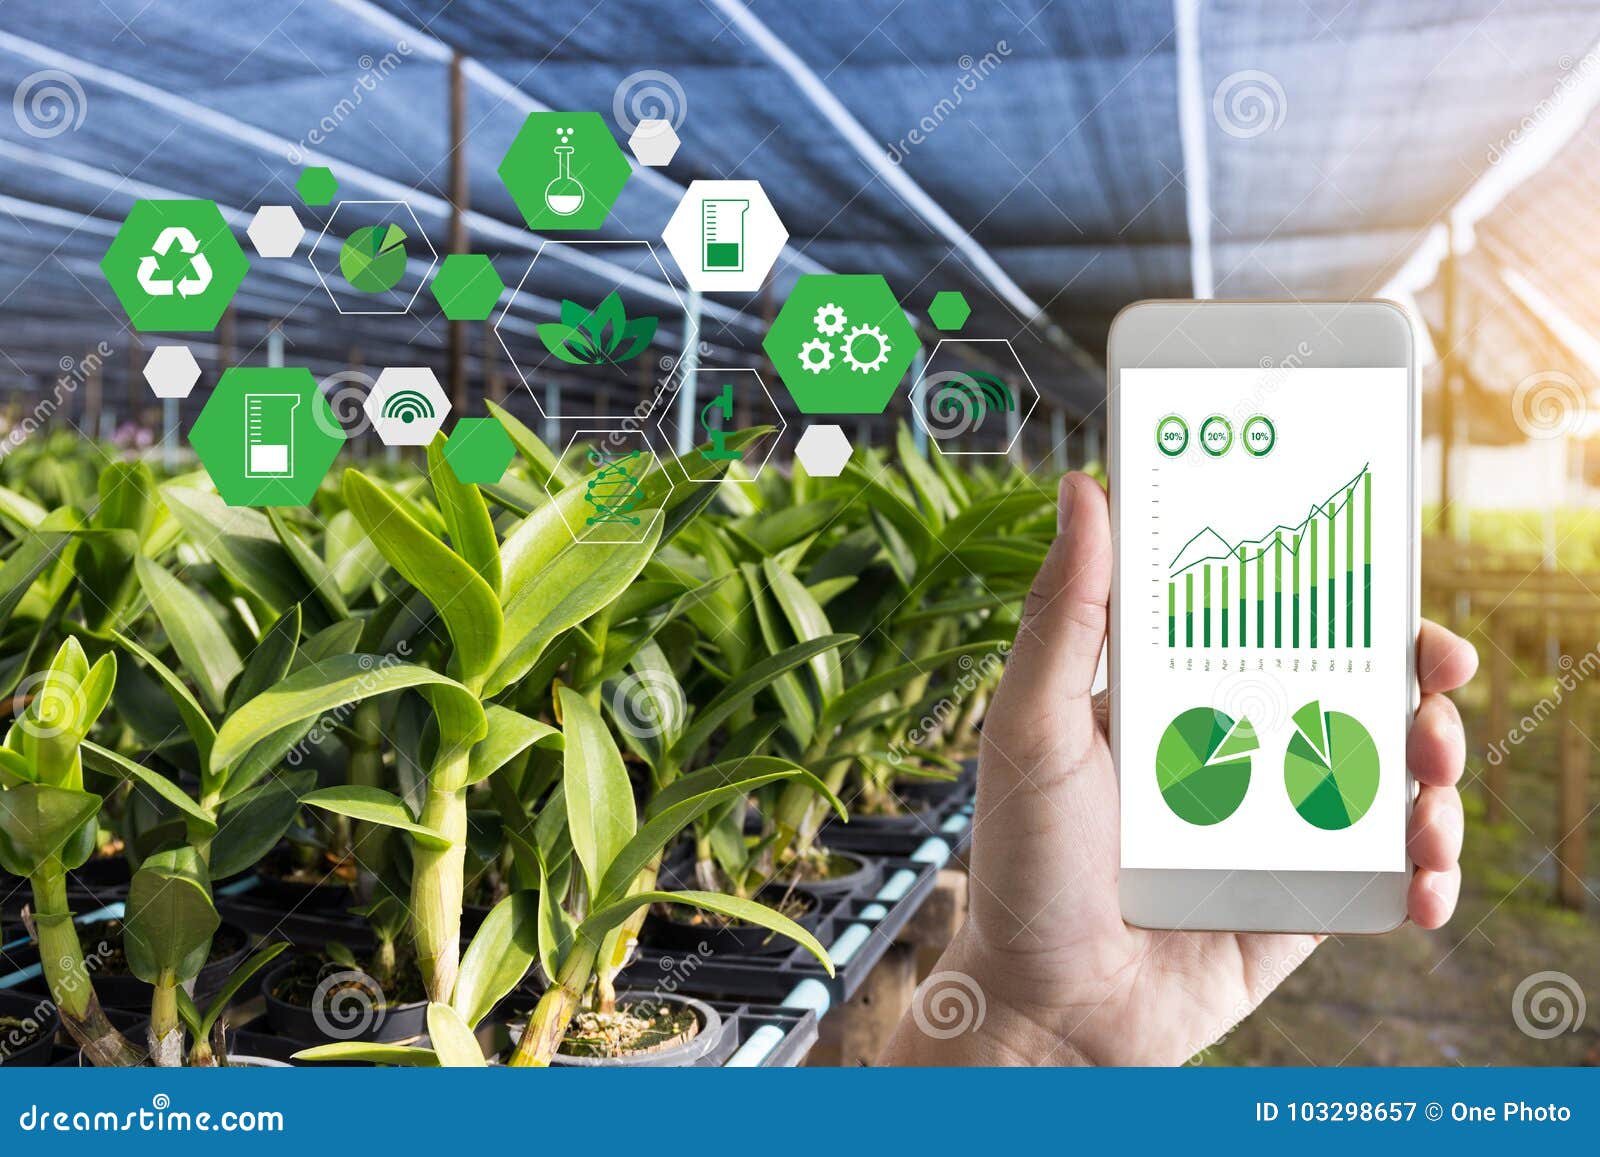 agriculture technology concept man agronomist using a tablet int